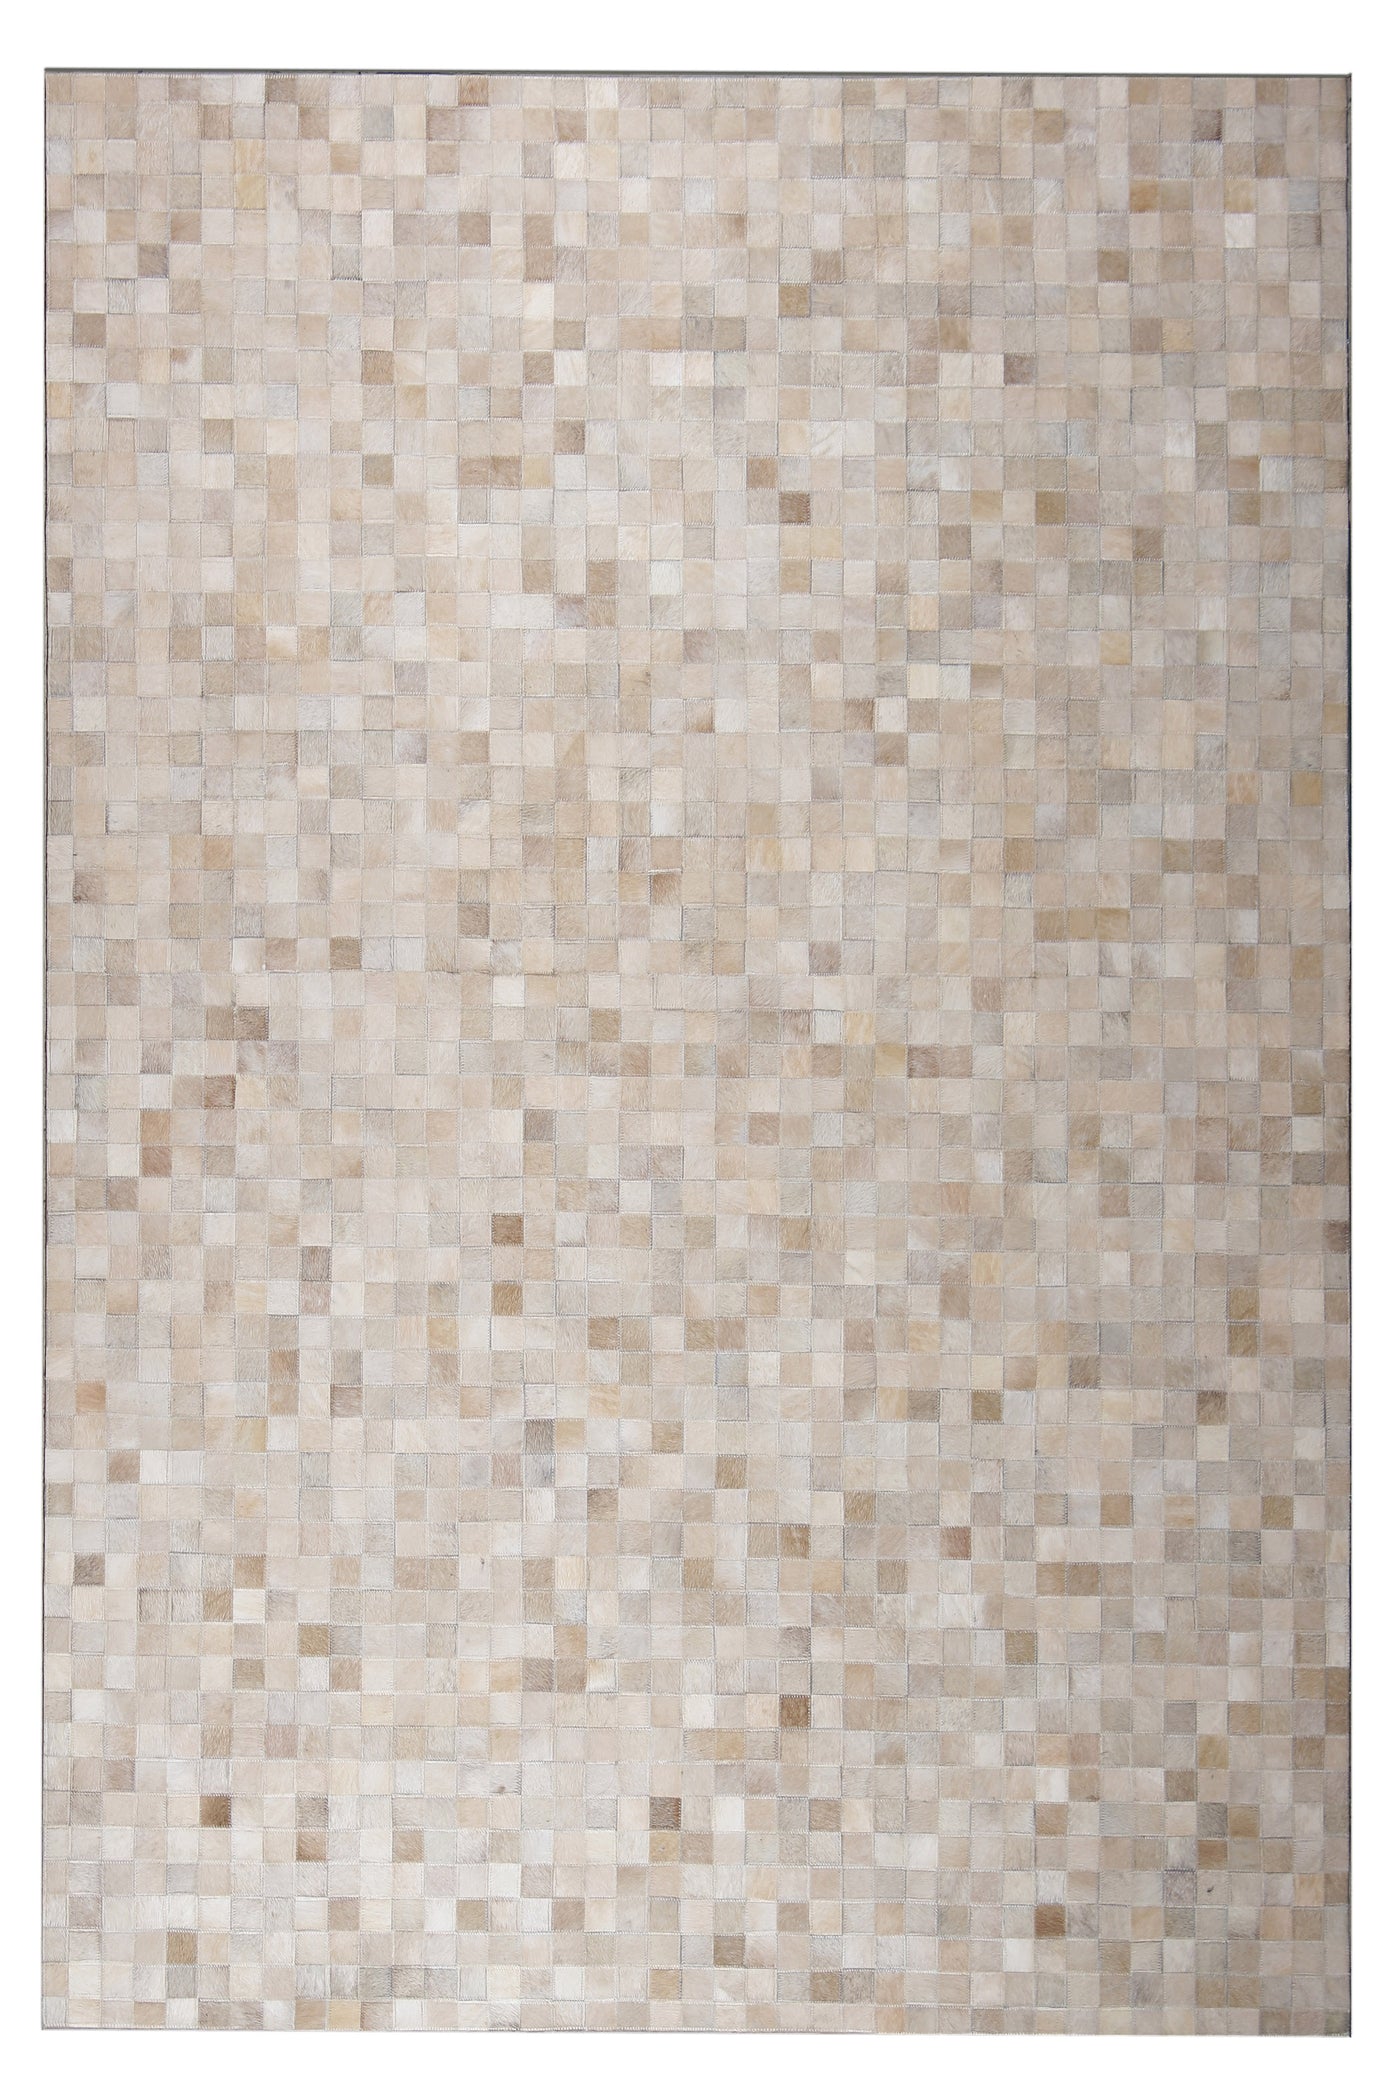 Durable Handmade Natural Leather Patchwork Cowhide Tikkul Area Rug by Rug Factory Plus - Rug Factory Plus